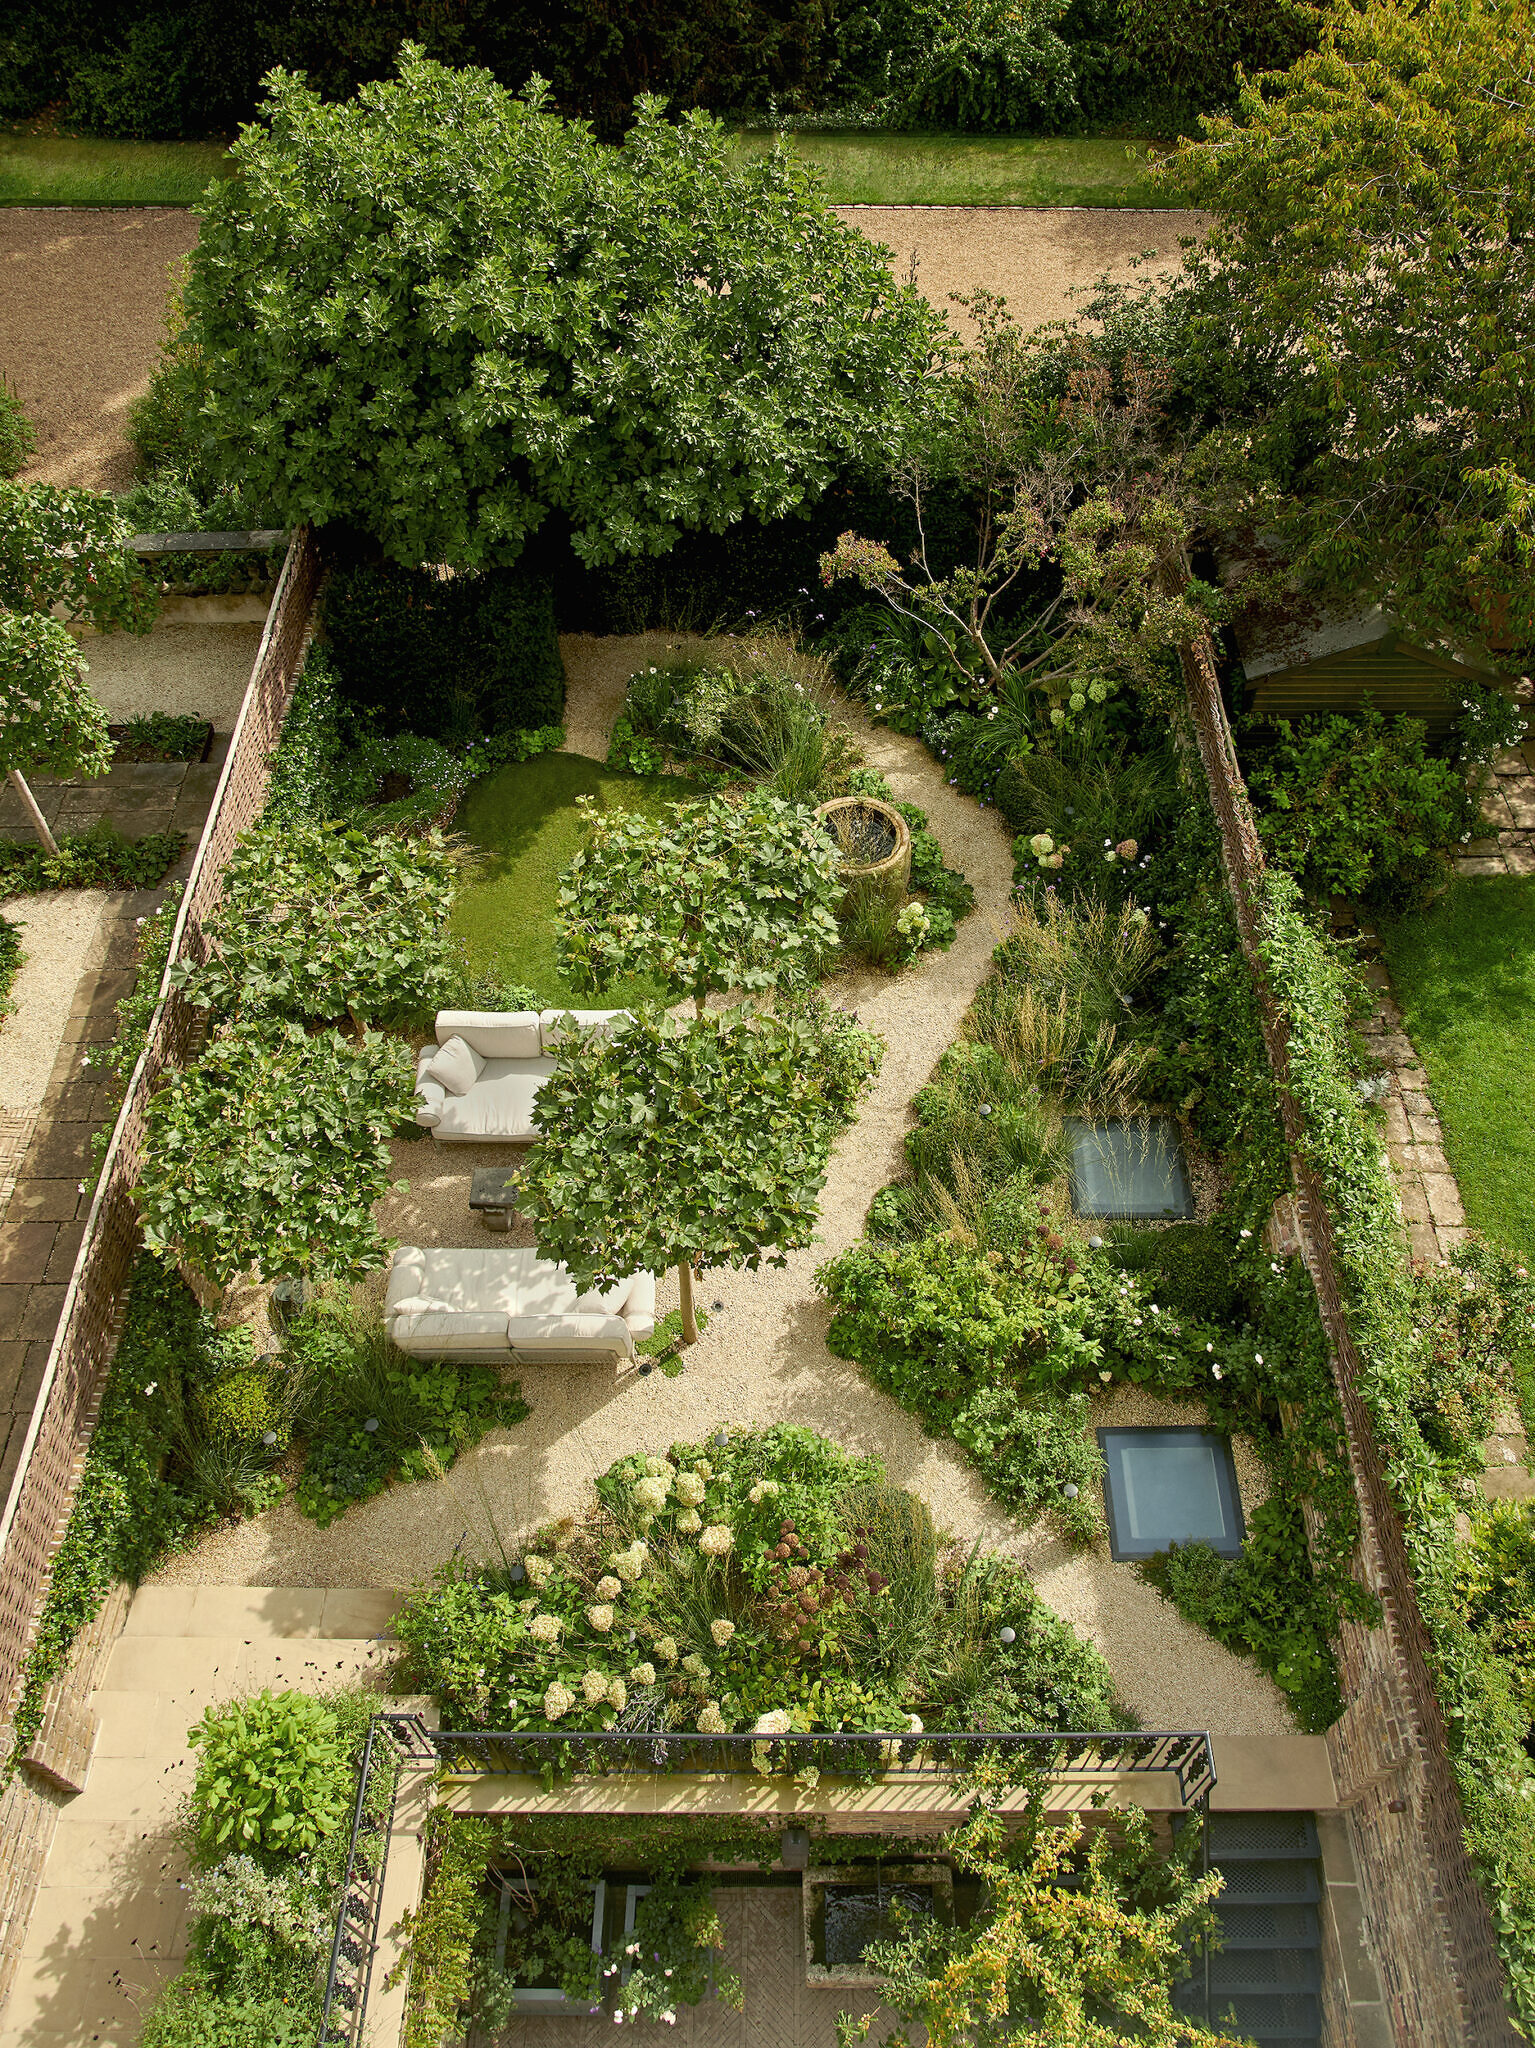 Aerial view image of the outside garden, with pathways throughout and a seating area to the left side.